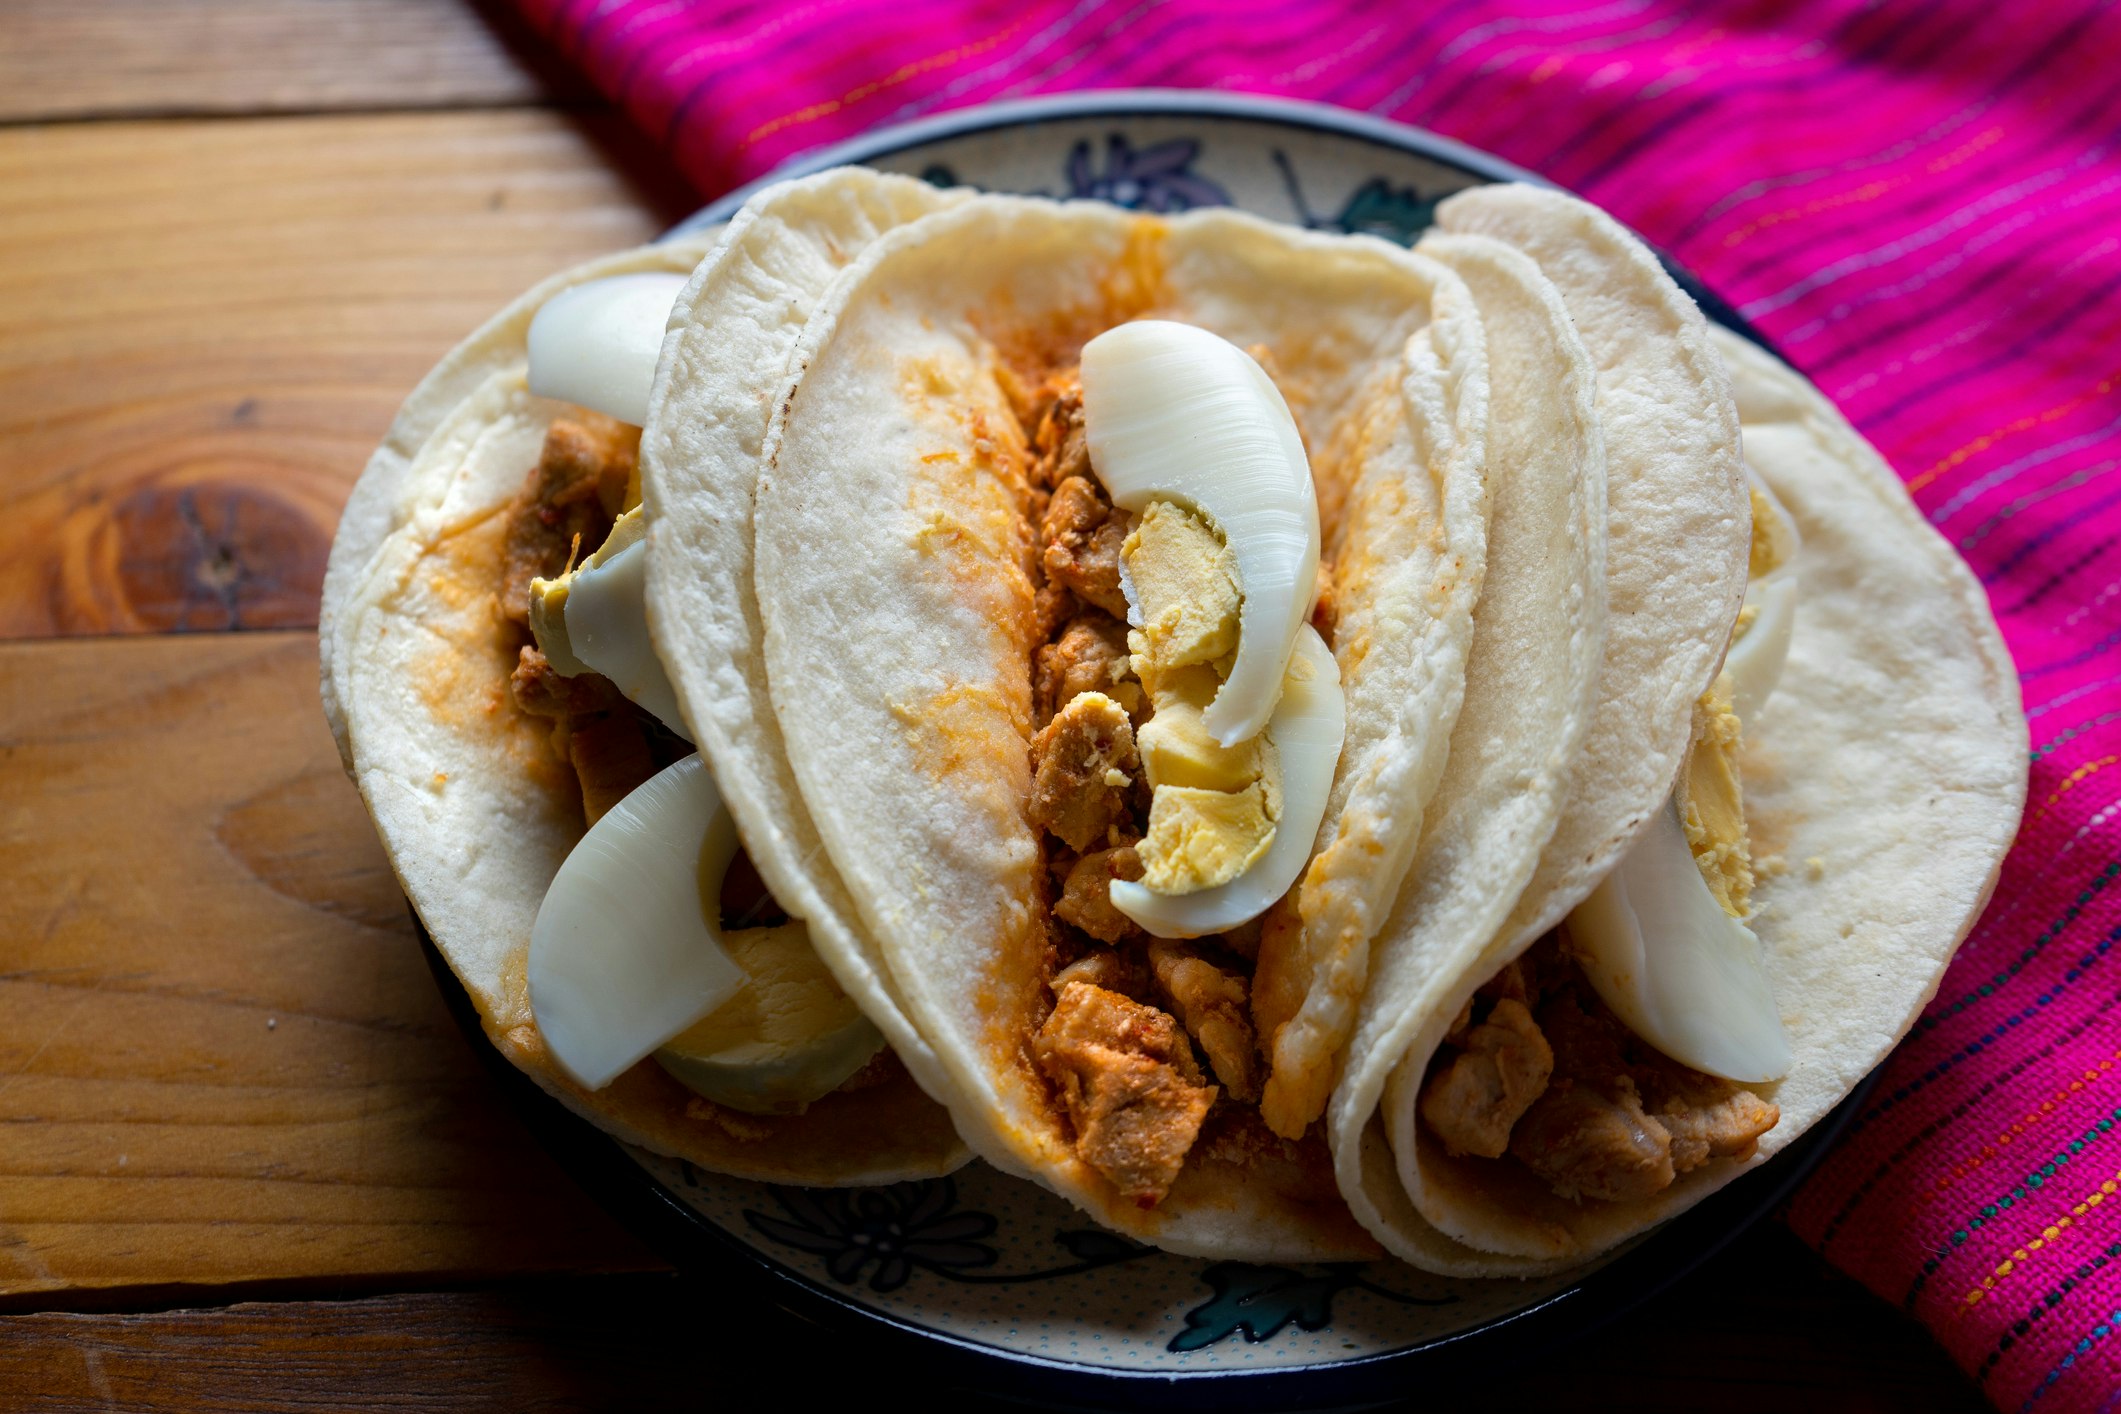 A blue and white plate of three pork tenderloin tacos topped with hardboiled egg in double flour tortillas sits on a warm wooden table next to a hot magenta woven cloth with tiny blue and yellow stripes